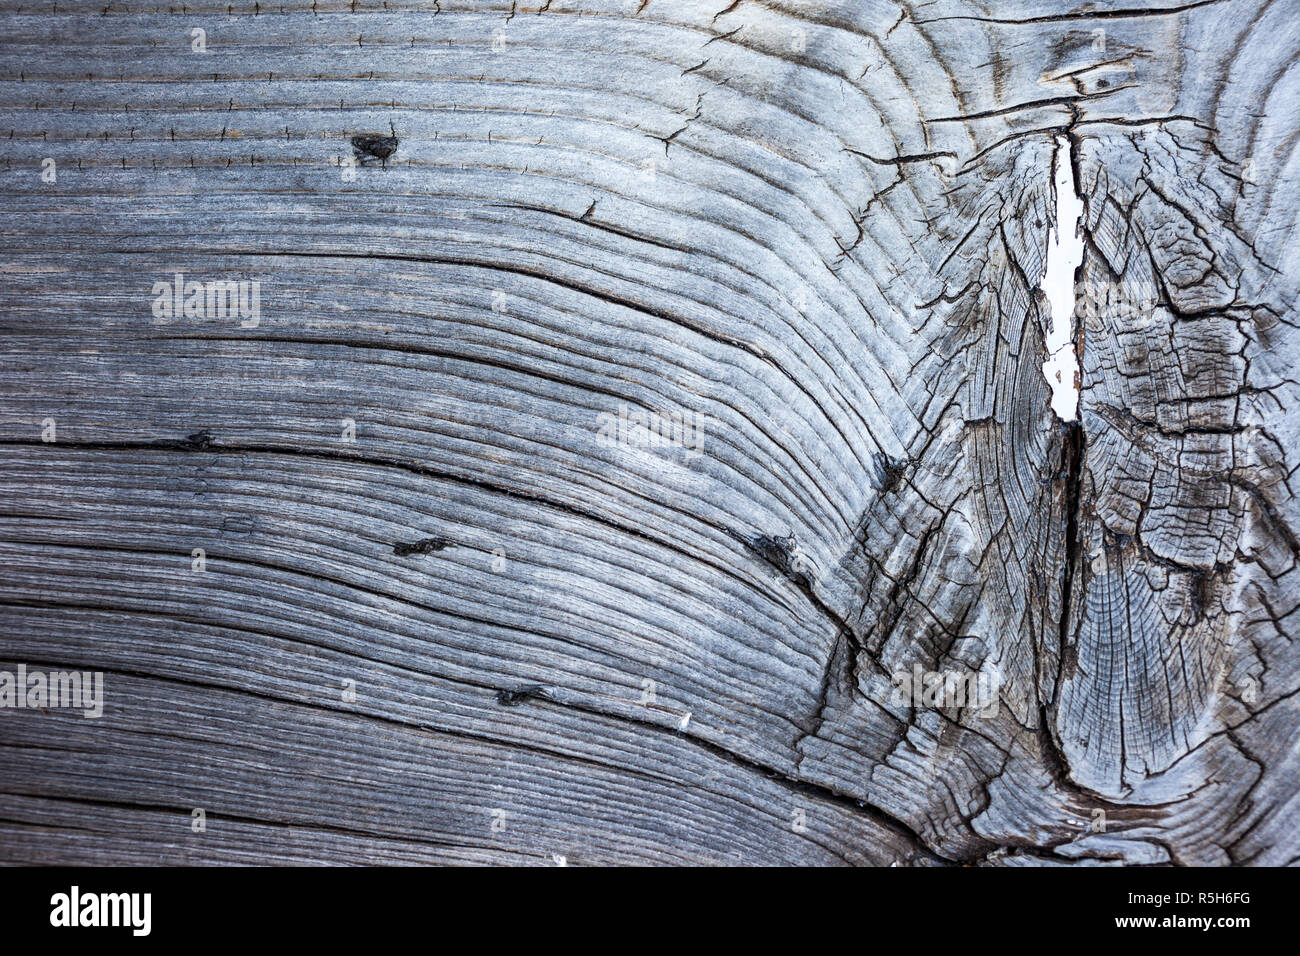 old,weathered wooden board Stock Photo